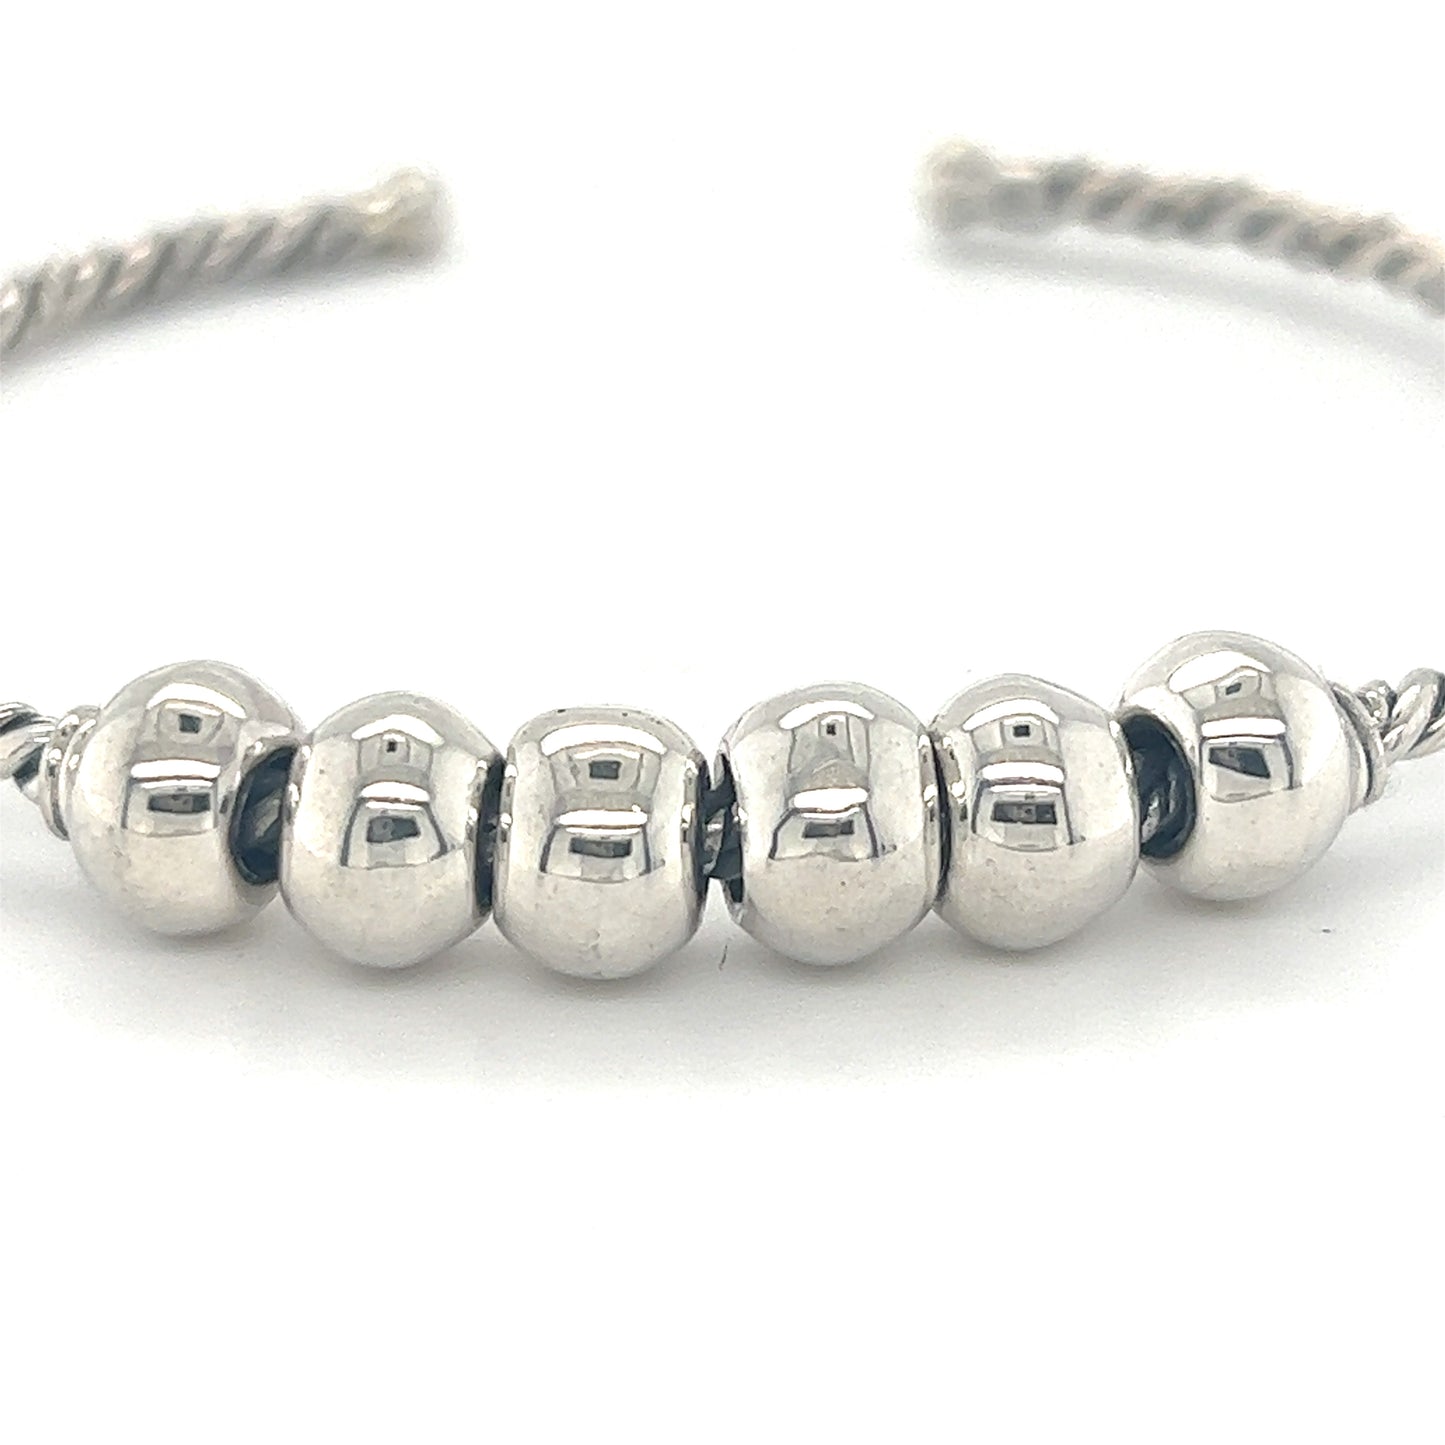 A Handmade Twisted Cuff with Balls by Super Silver adorned with four antique-look silver beads.